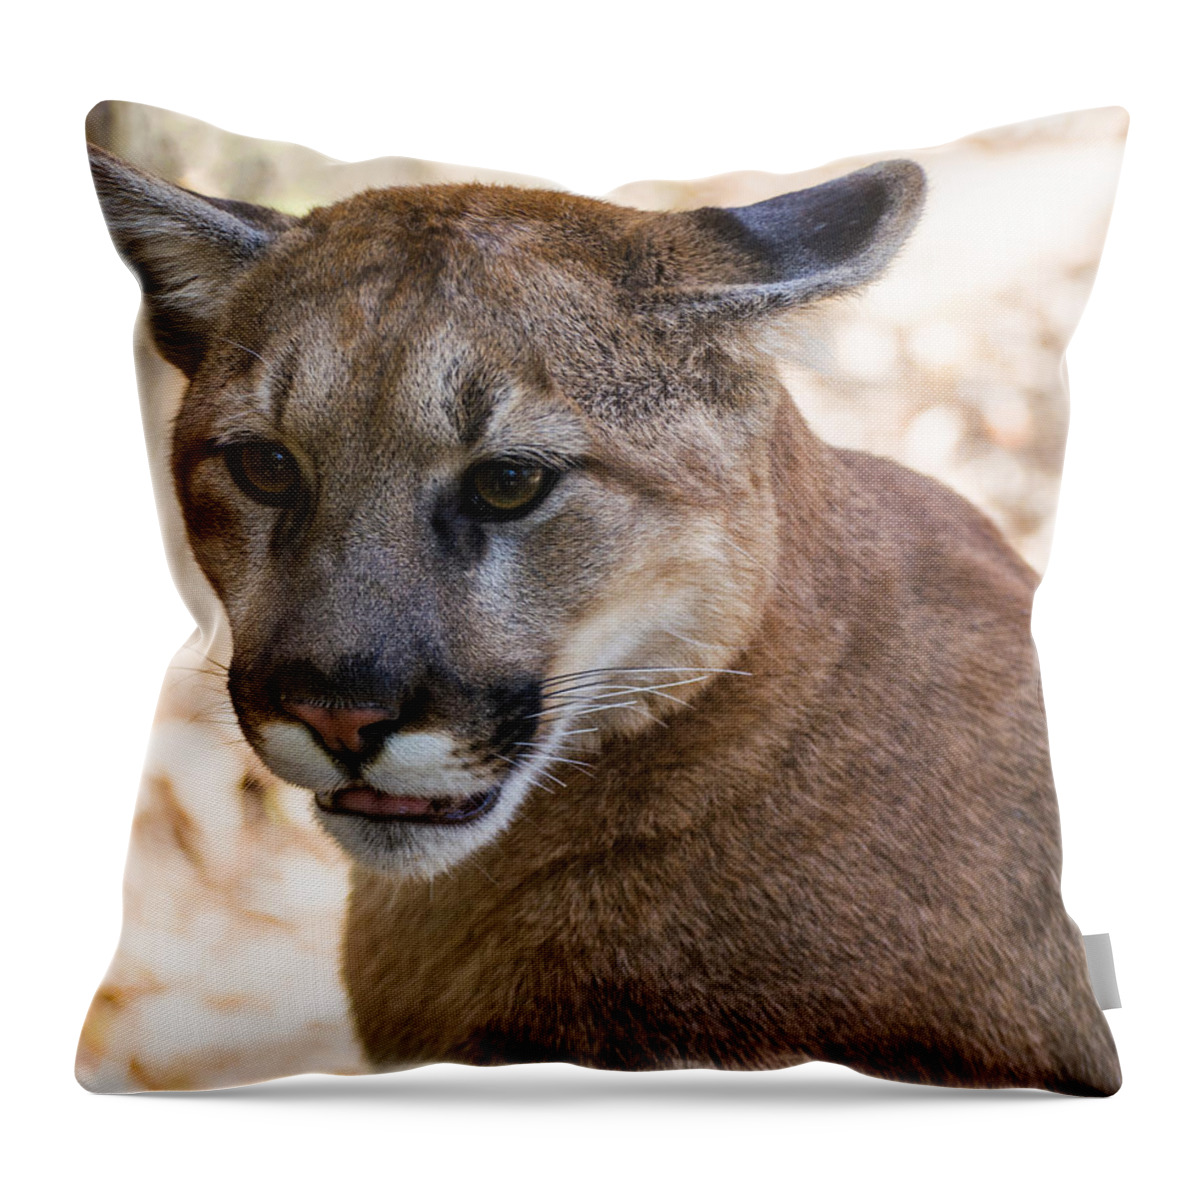 Cougar Throw Pillow featuring the photograph Cougar Portrait by Flees Photos